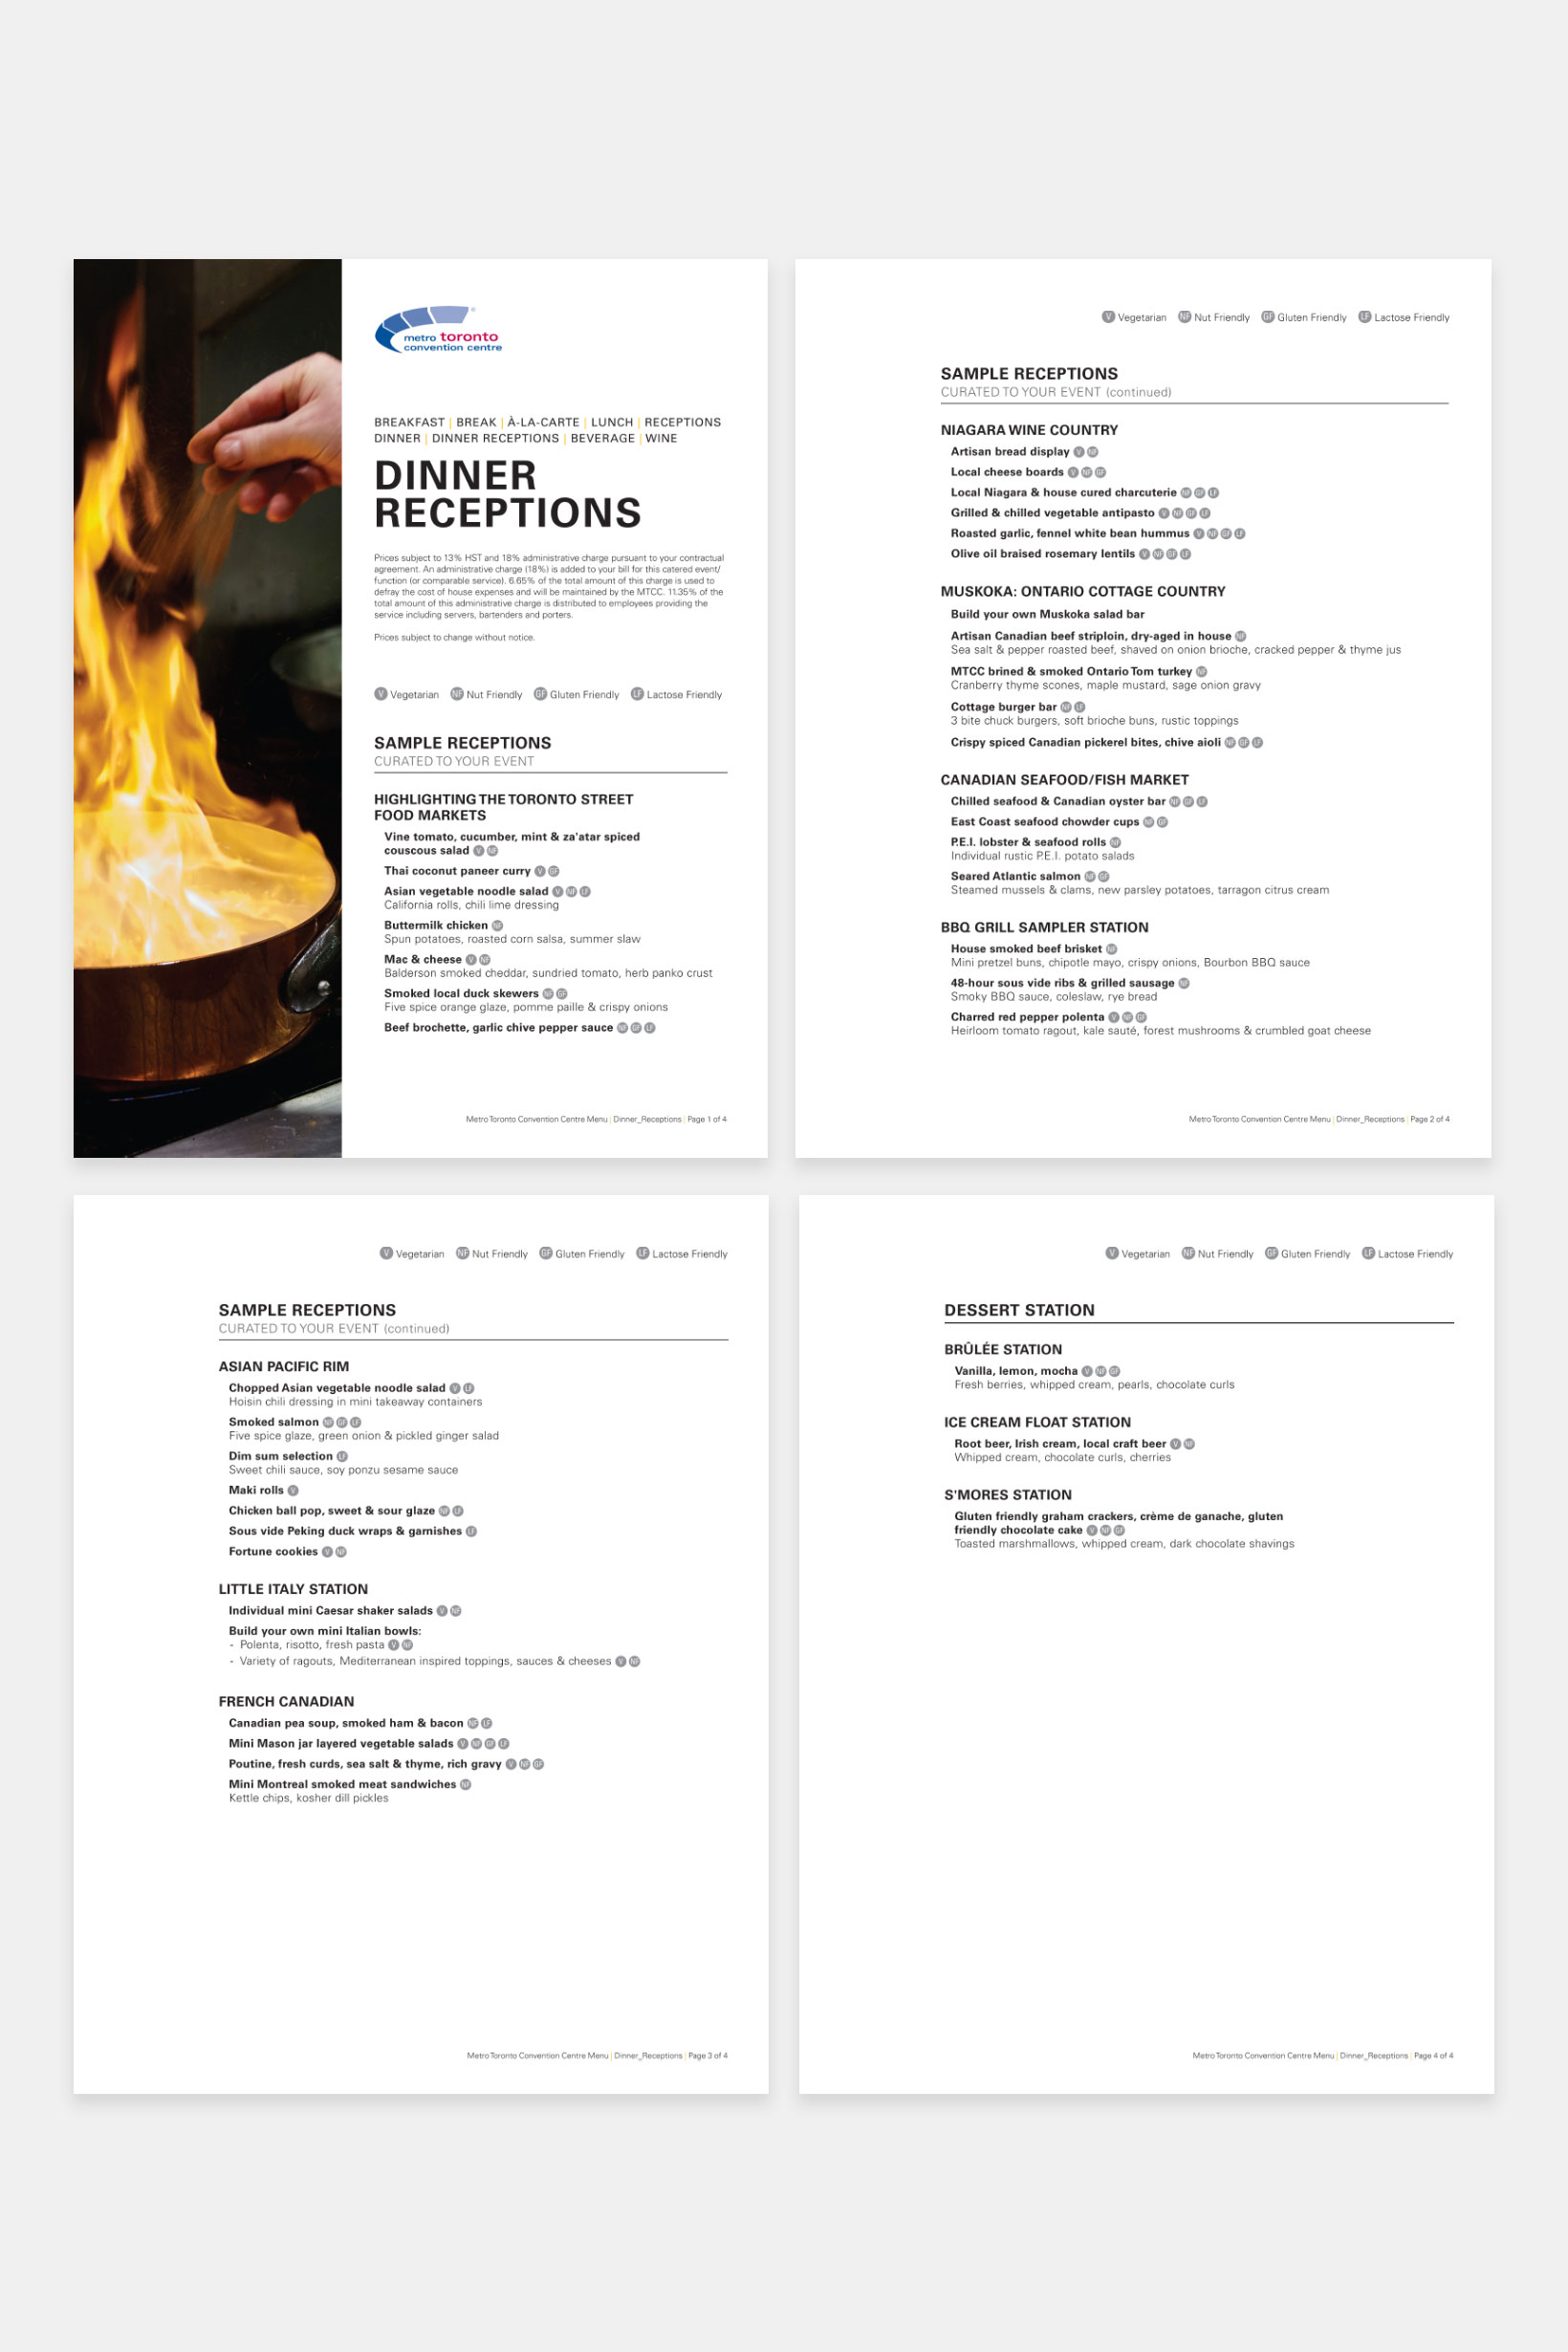 Featuring the Dinner Receptions menu, with image of a fire in a wok.